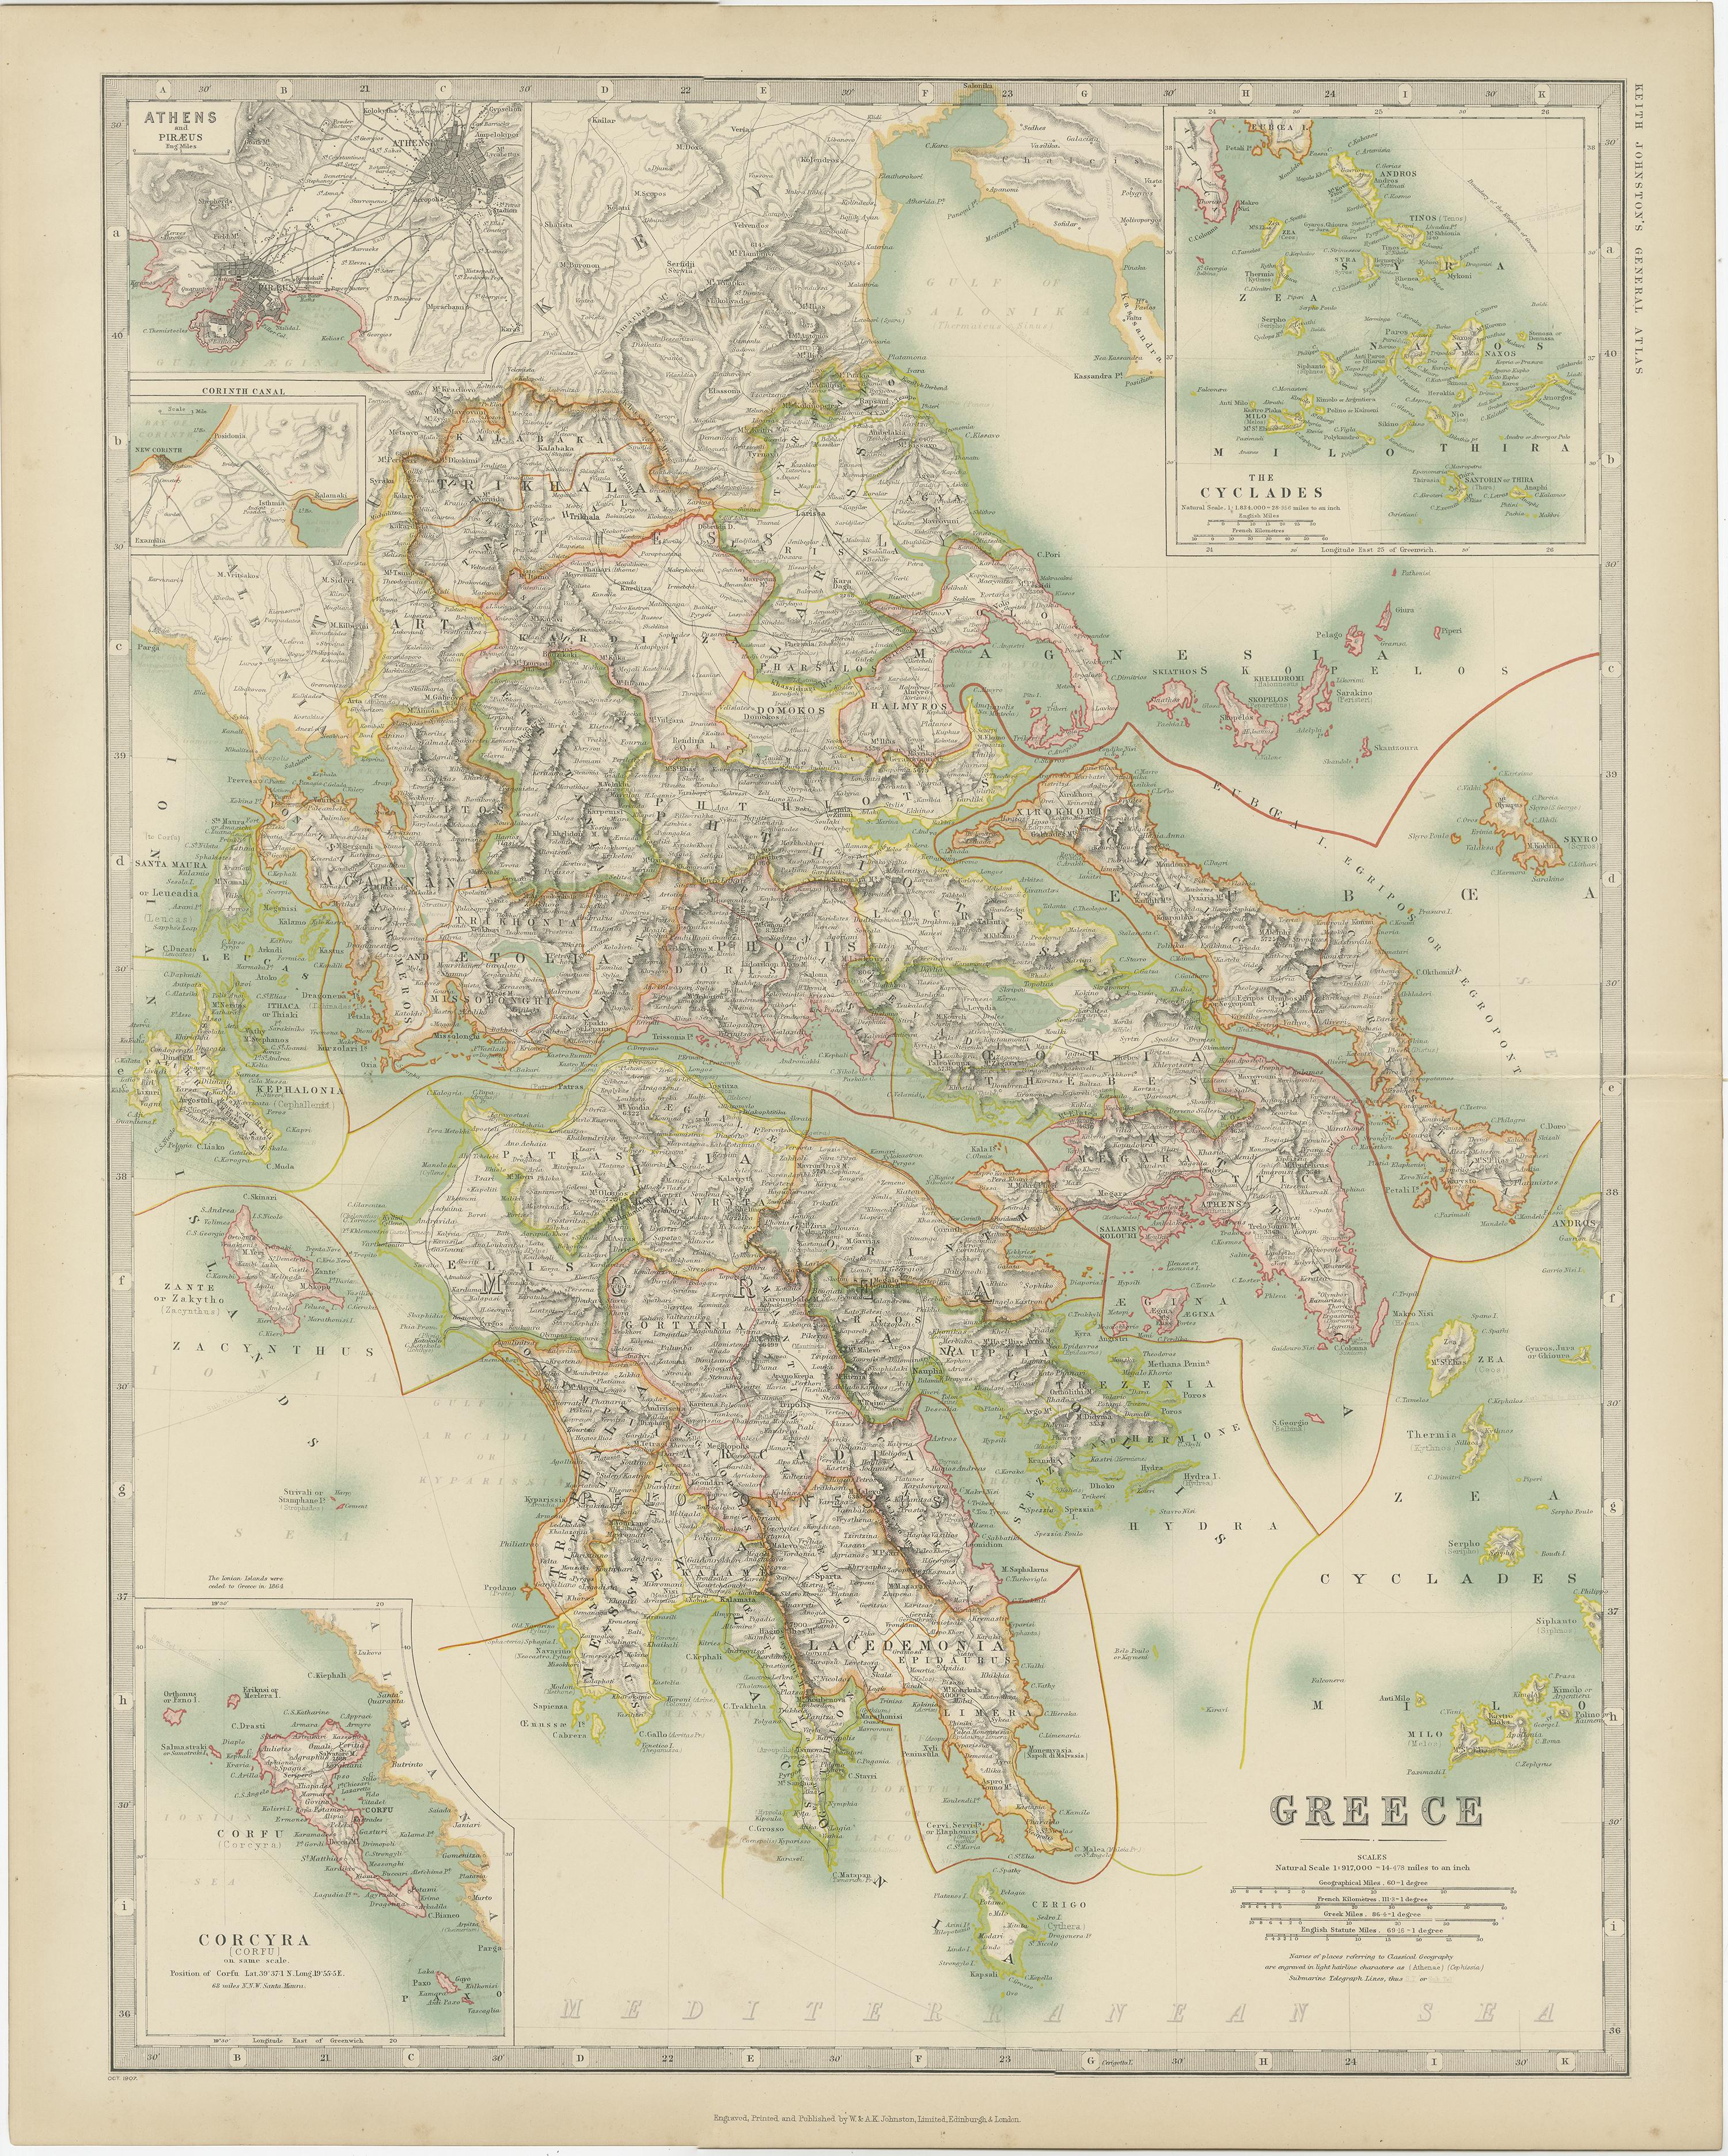 Antique map titled 'Greece'. Original antique map of Greece. with inset maps of Athens, Corinth Canal, Corfu, and the Cyclades. This map originates from the ‘Royal Atlas of Modern Geography’. Published by W. & A.K. Johnston, 1909.